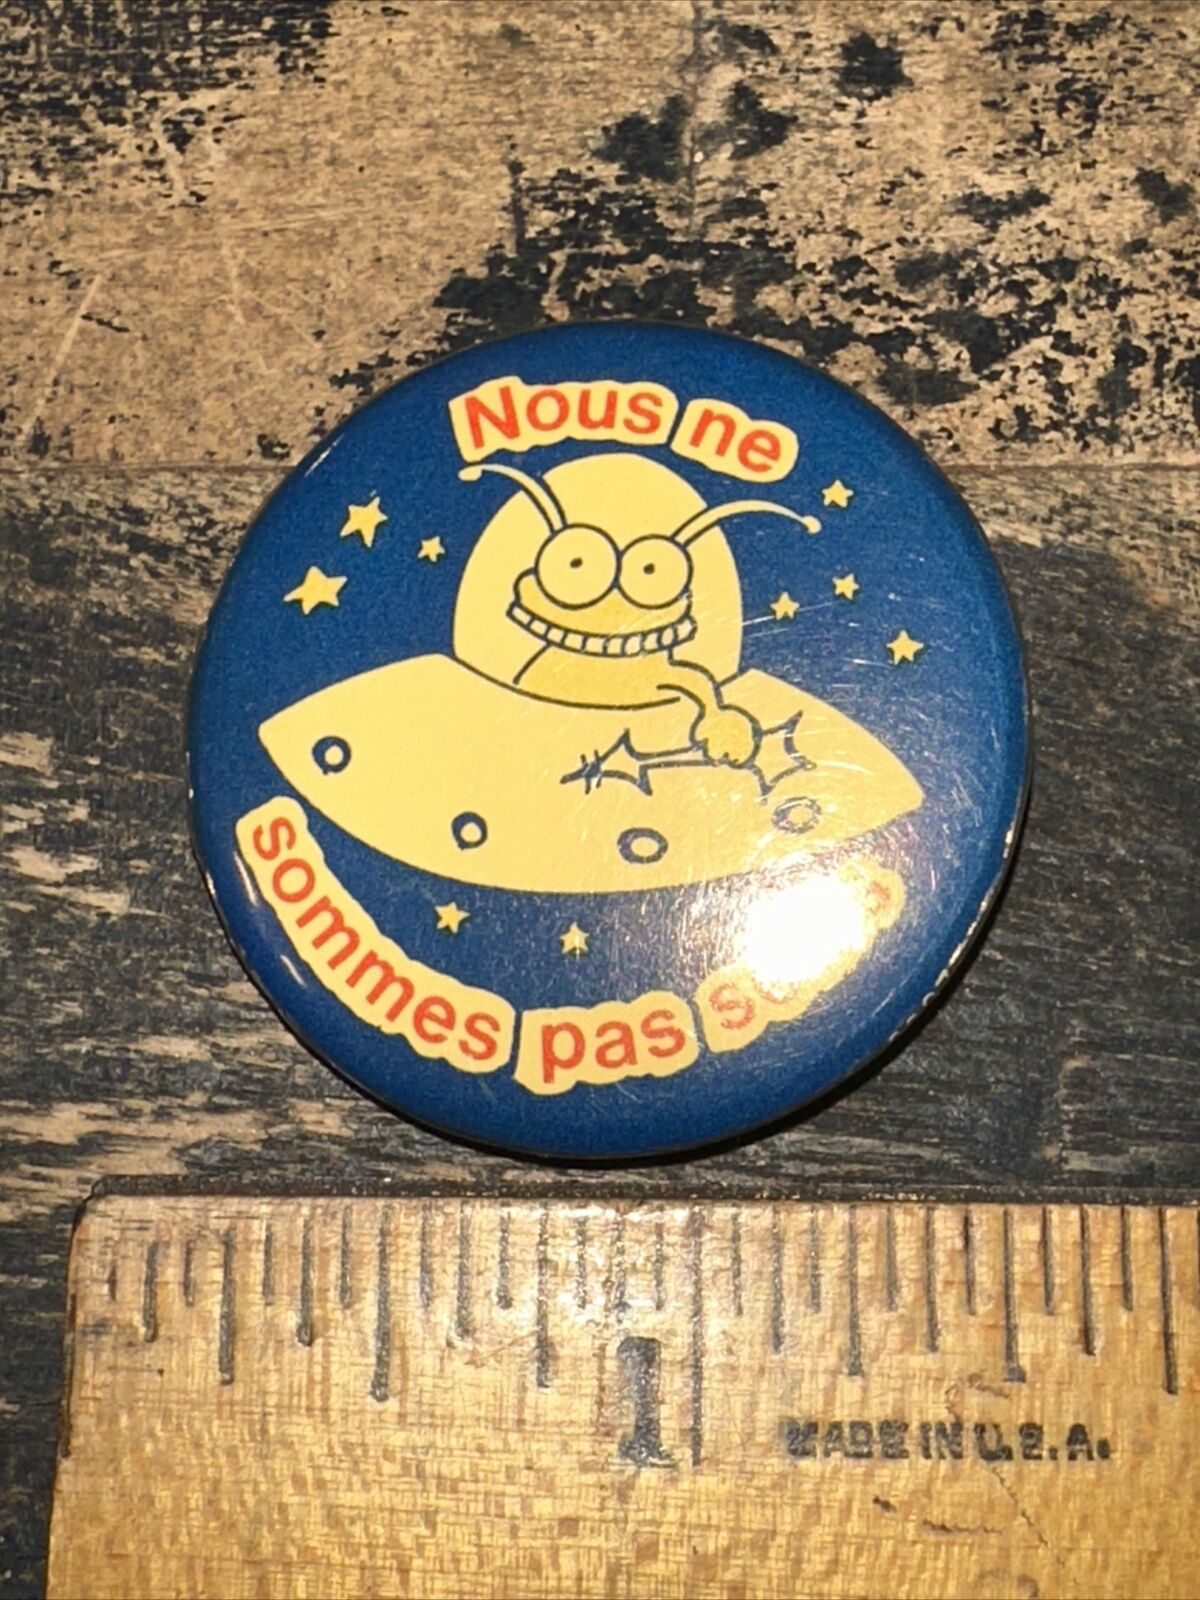 1984 Vintage lapel Pin “ We Are Not Alone “ Nous ne Sommes Pas Seuls